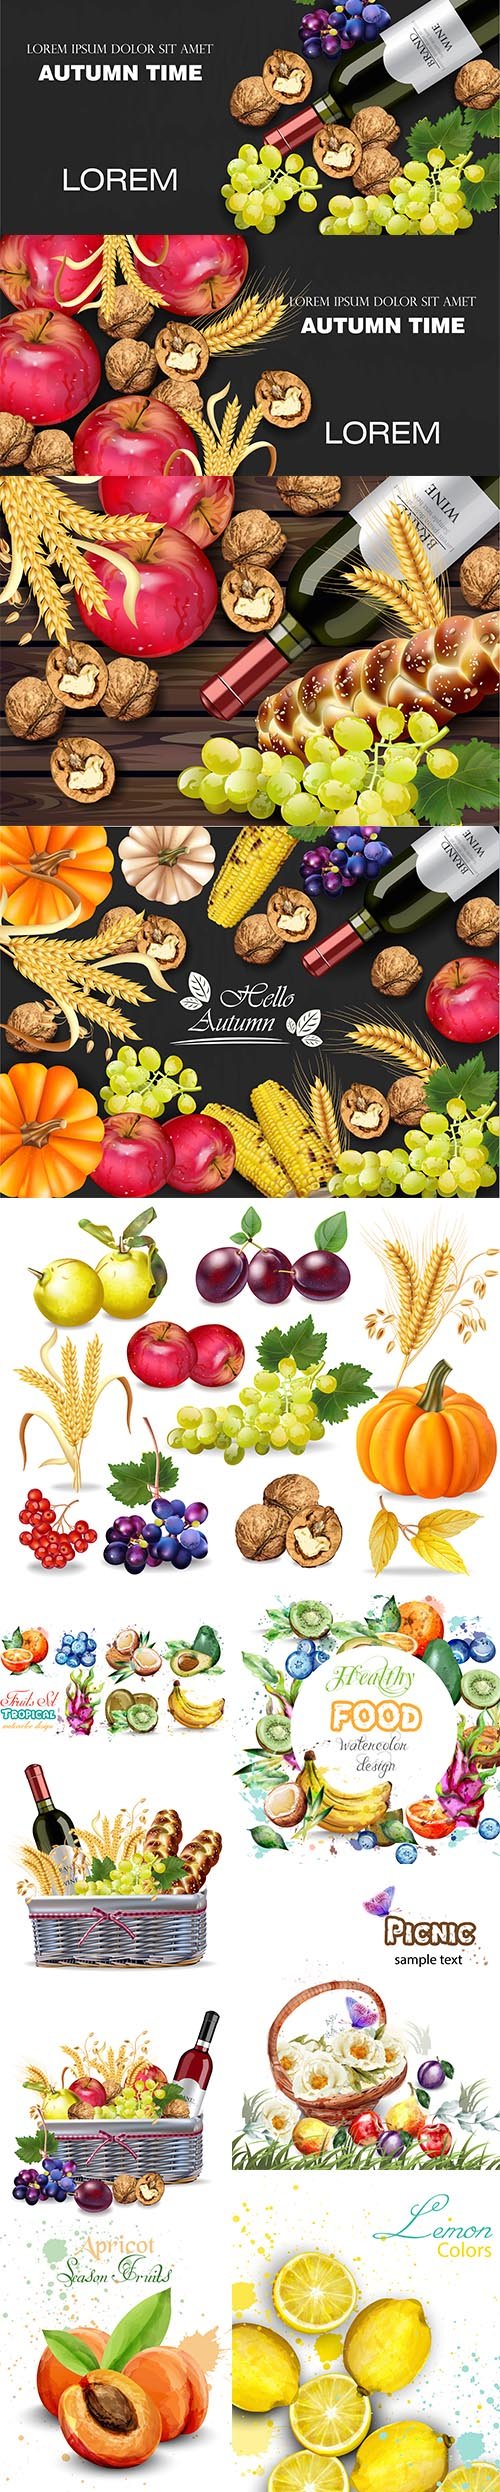 Watercolor Autumn Fruits and Vegetables Set